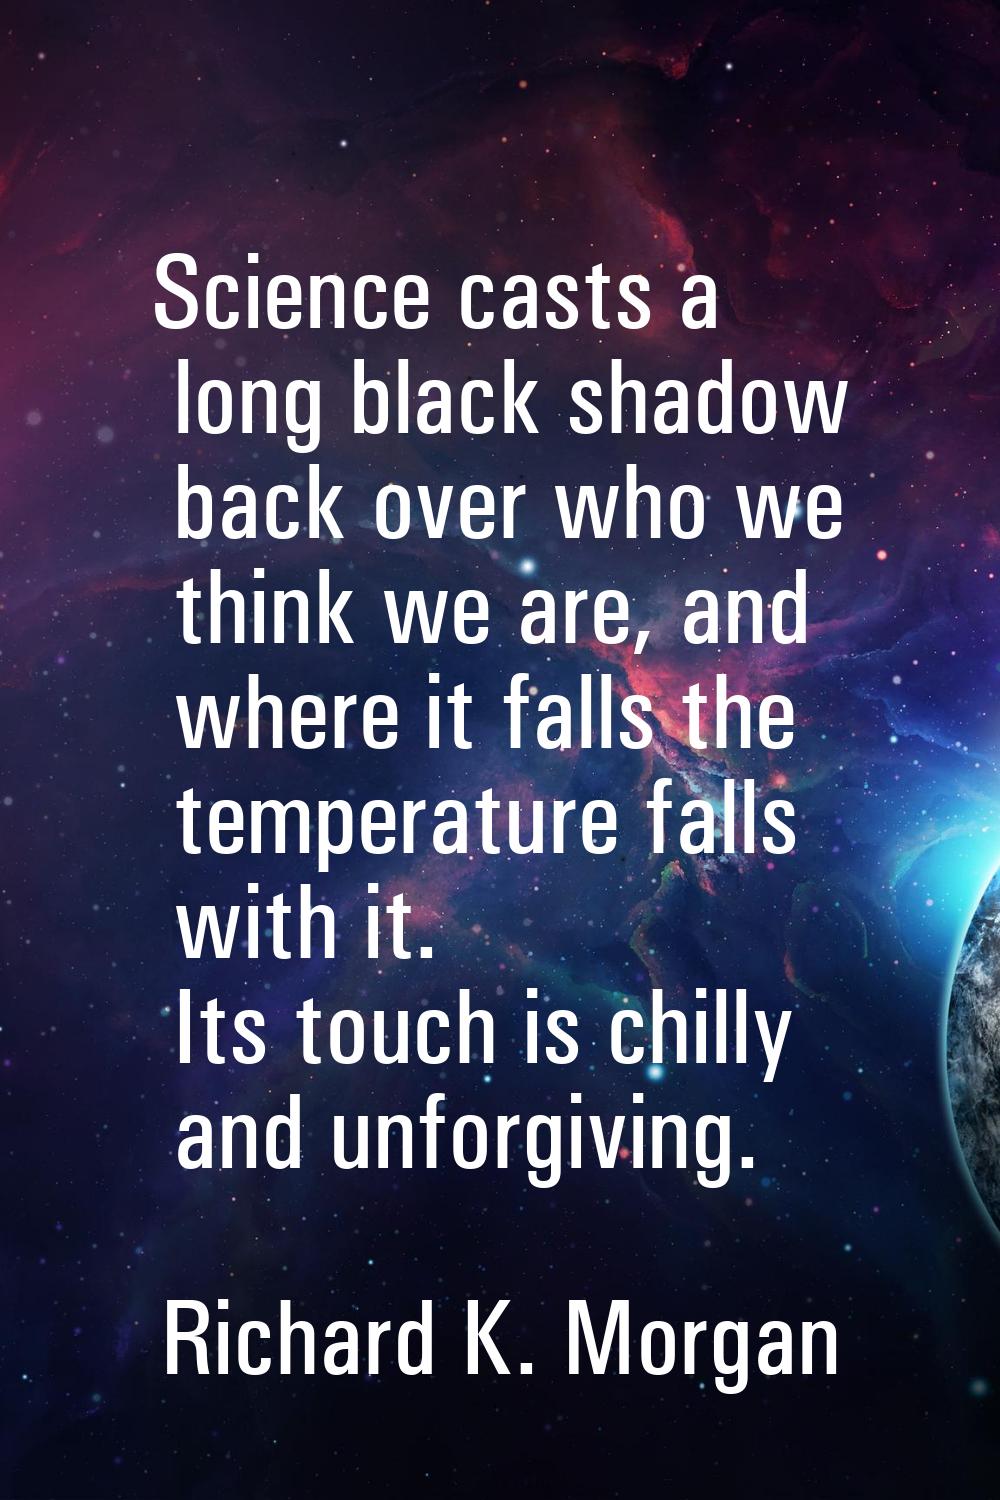 Science casts a long black shadow back over who we think we are, and where it falls the temperature